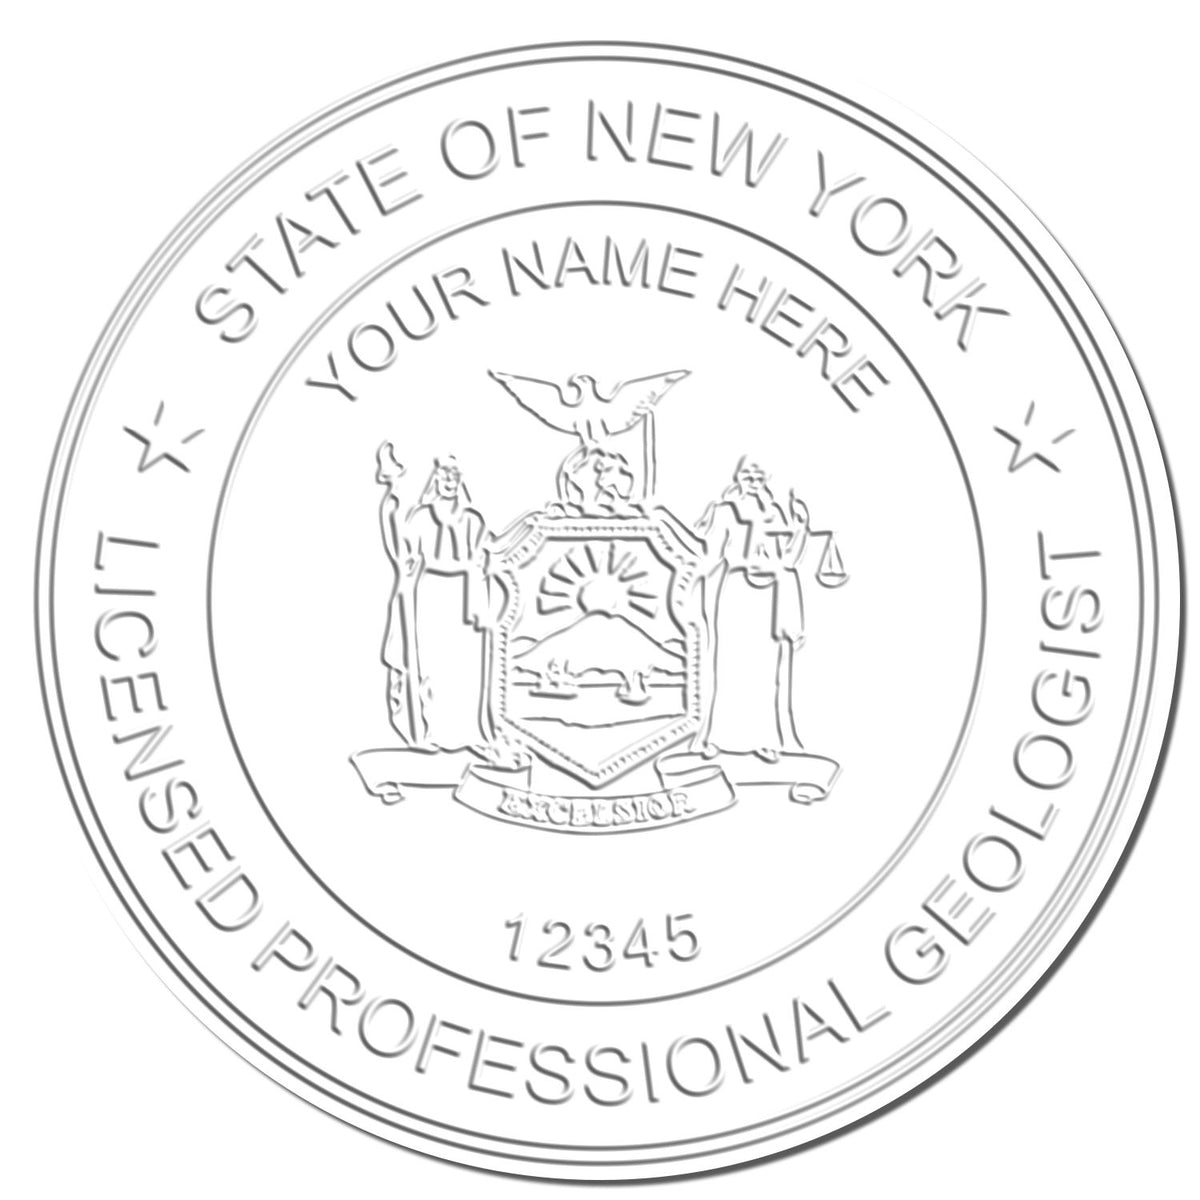 An in use photo of the Heavy Duty Cast Iron New York Geologist Seal Embosser showing a sample imprint on a cardstock